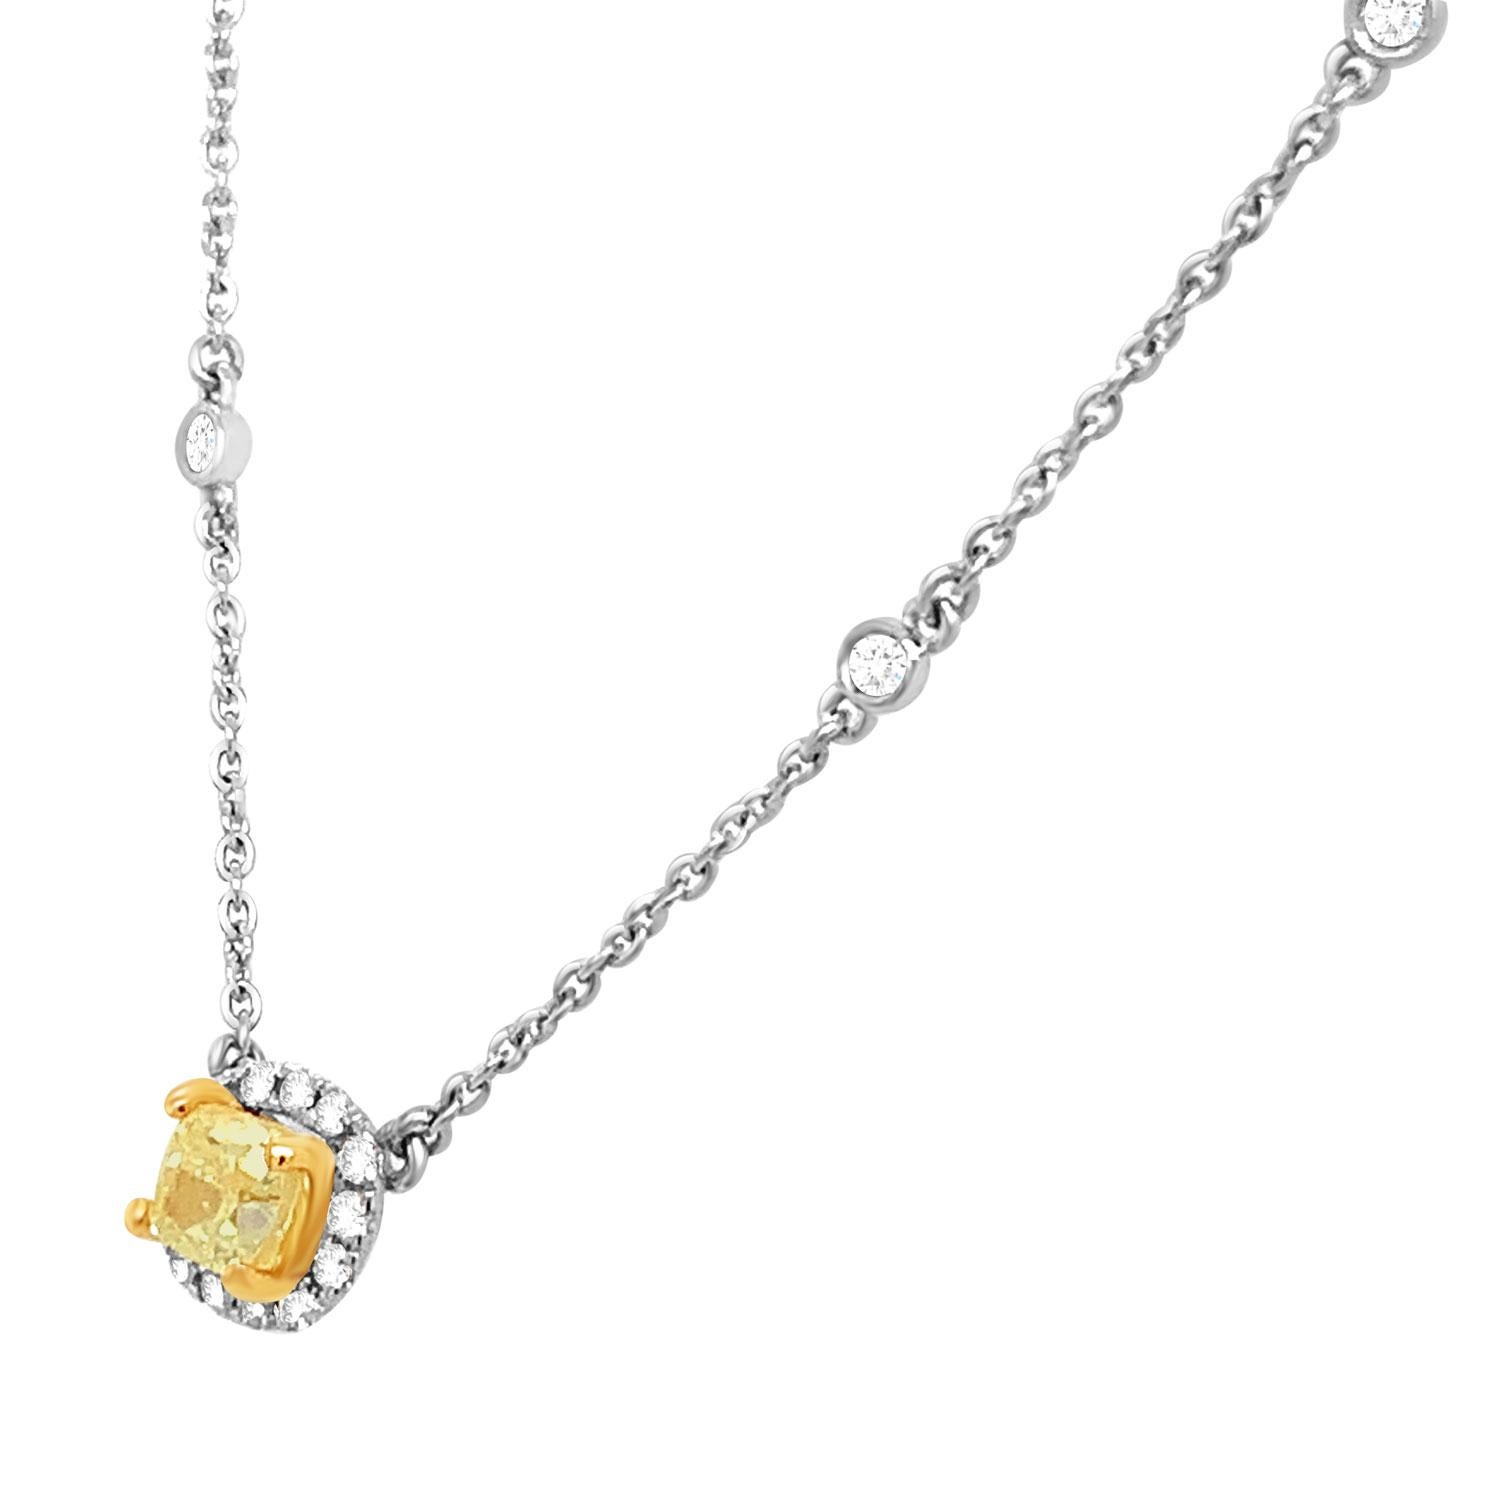 This stunning 18k white and yellow gold necklace features a 0.51 Carat Yellow Elongated cushion-shaped diamond encircled by one row of brilliant round diamonds on a 1 mm station chain containing sixteen (16) round brilliant diamonds bezel set.
The